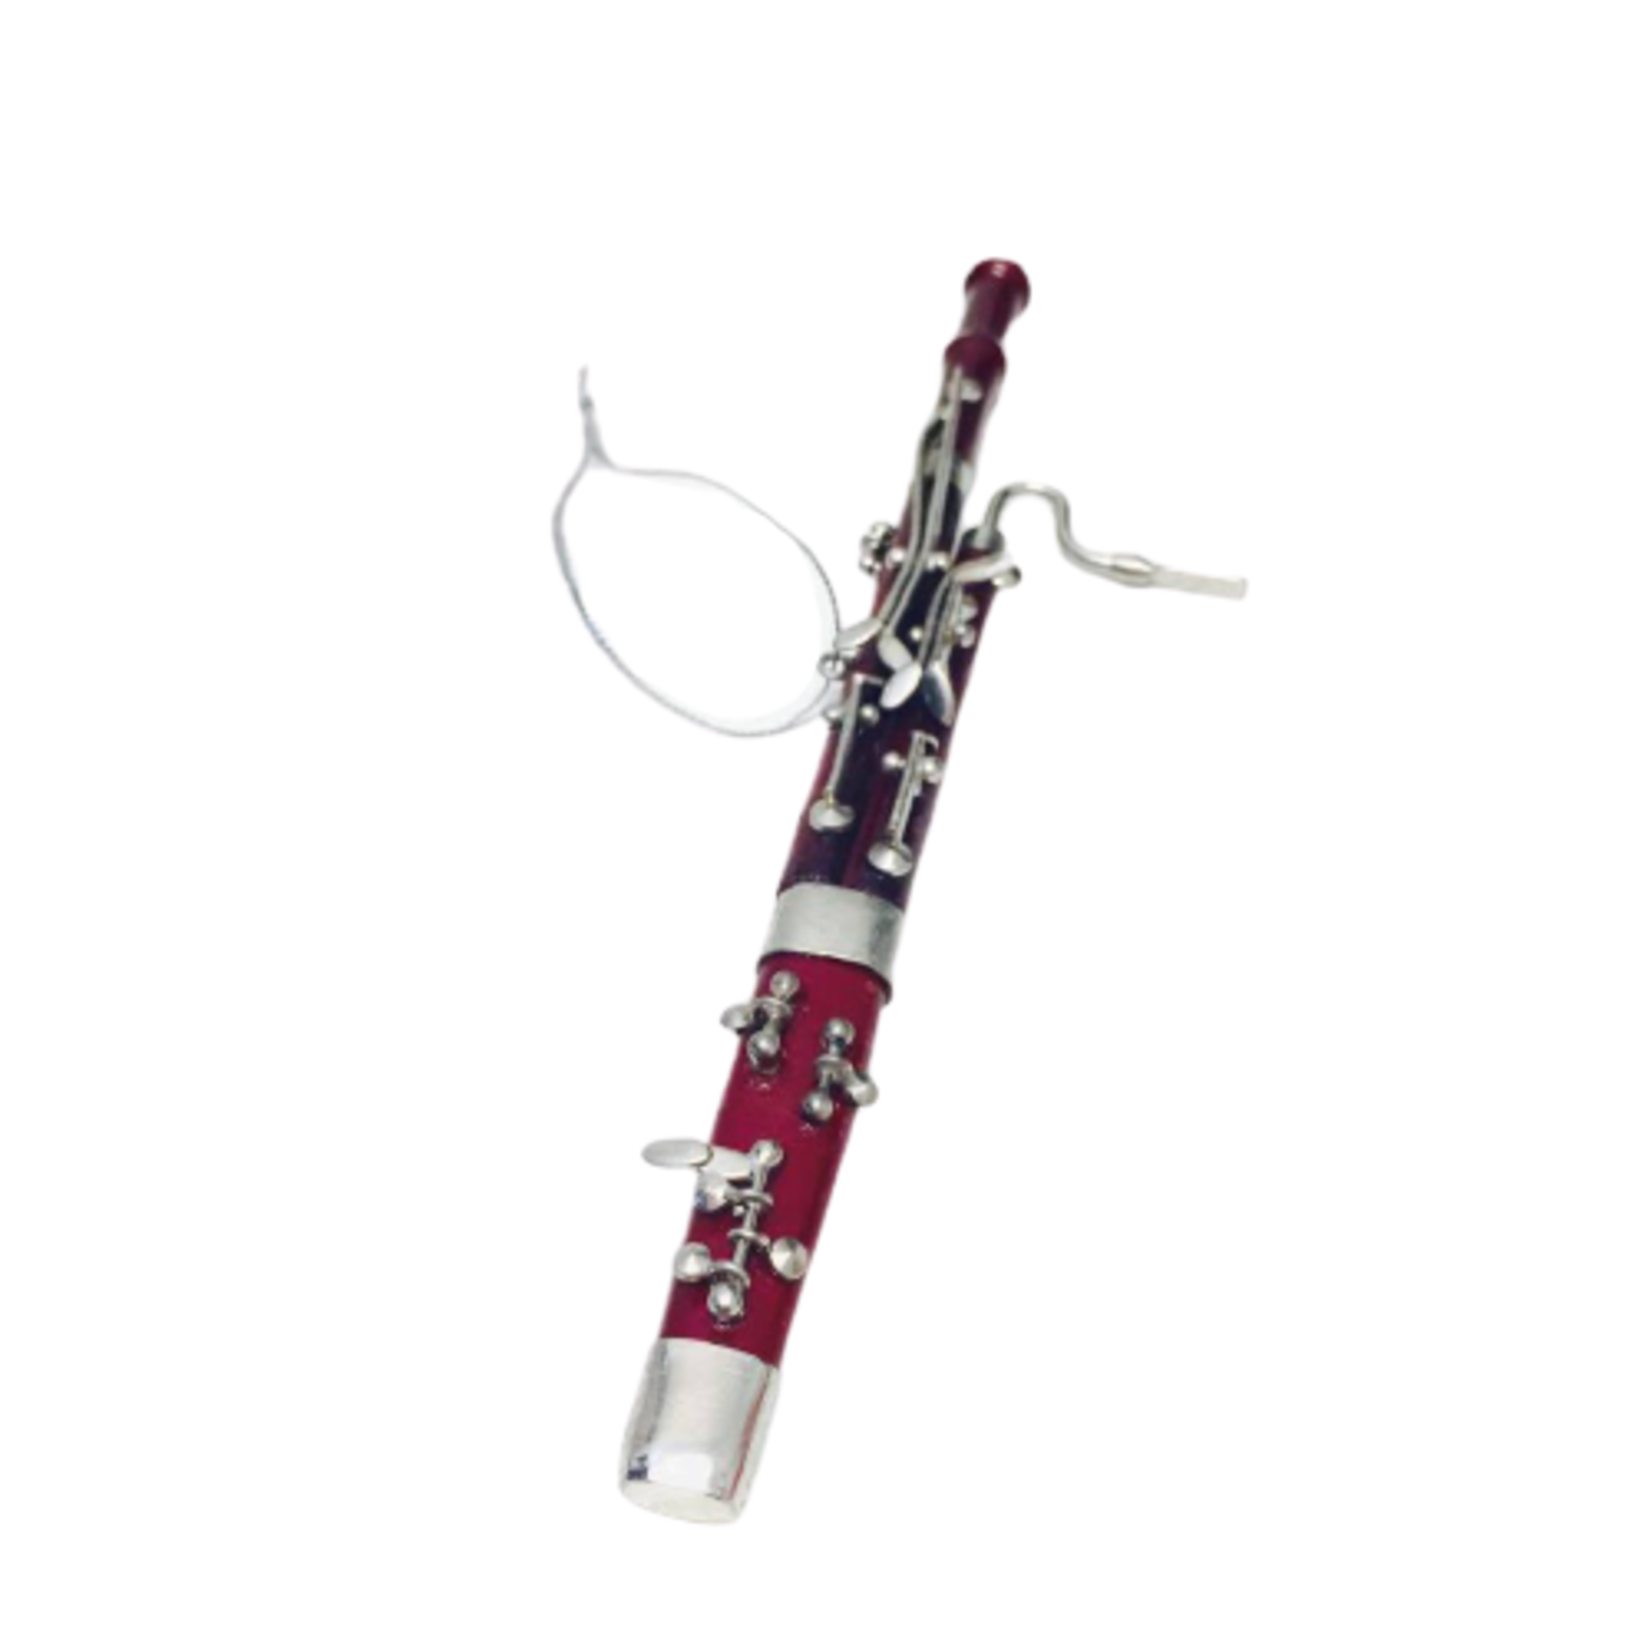 Broadway Gifts Bassoon ornament, wood, 6 inches